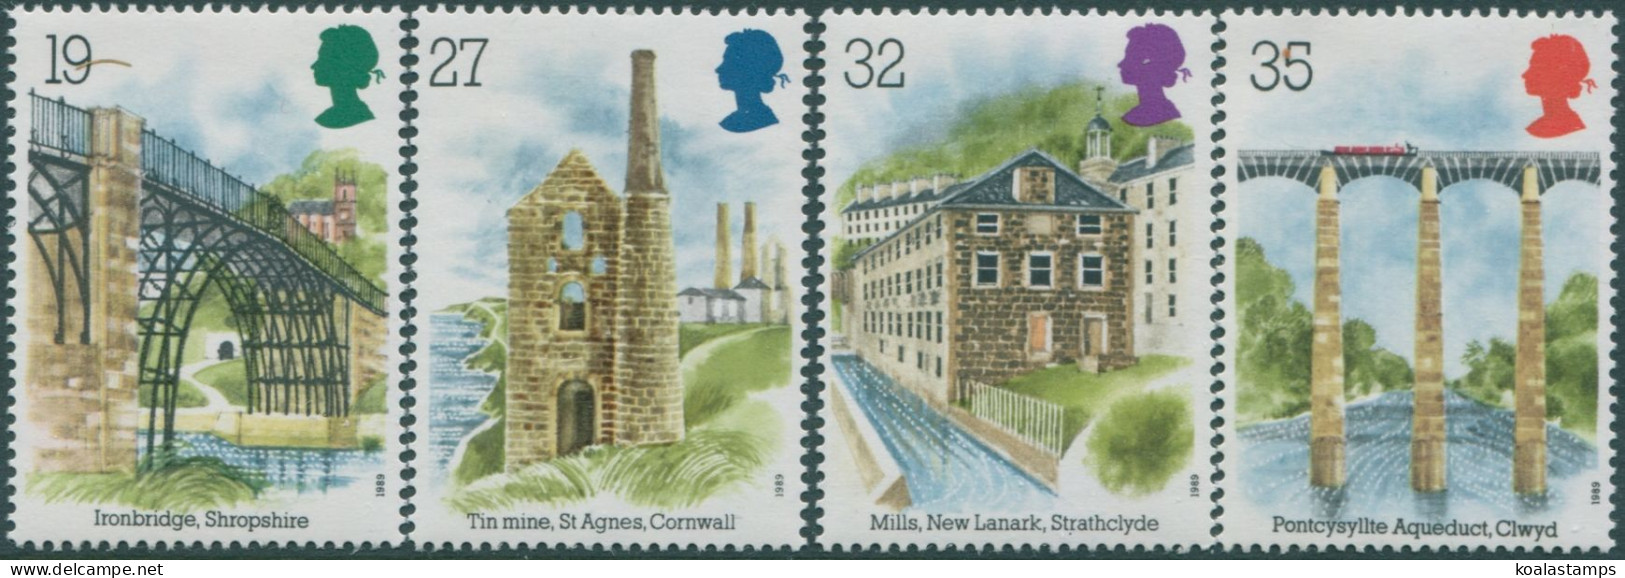 Great Britain 1989 SG1440-1443 QEII Industrial Archaeology Set MNH - Unclassified